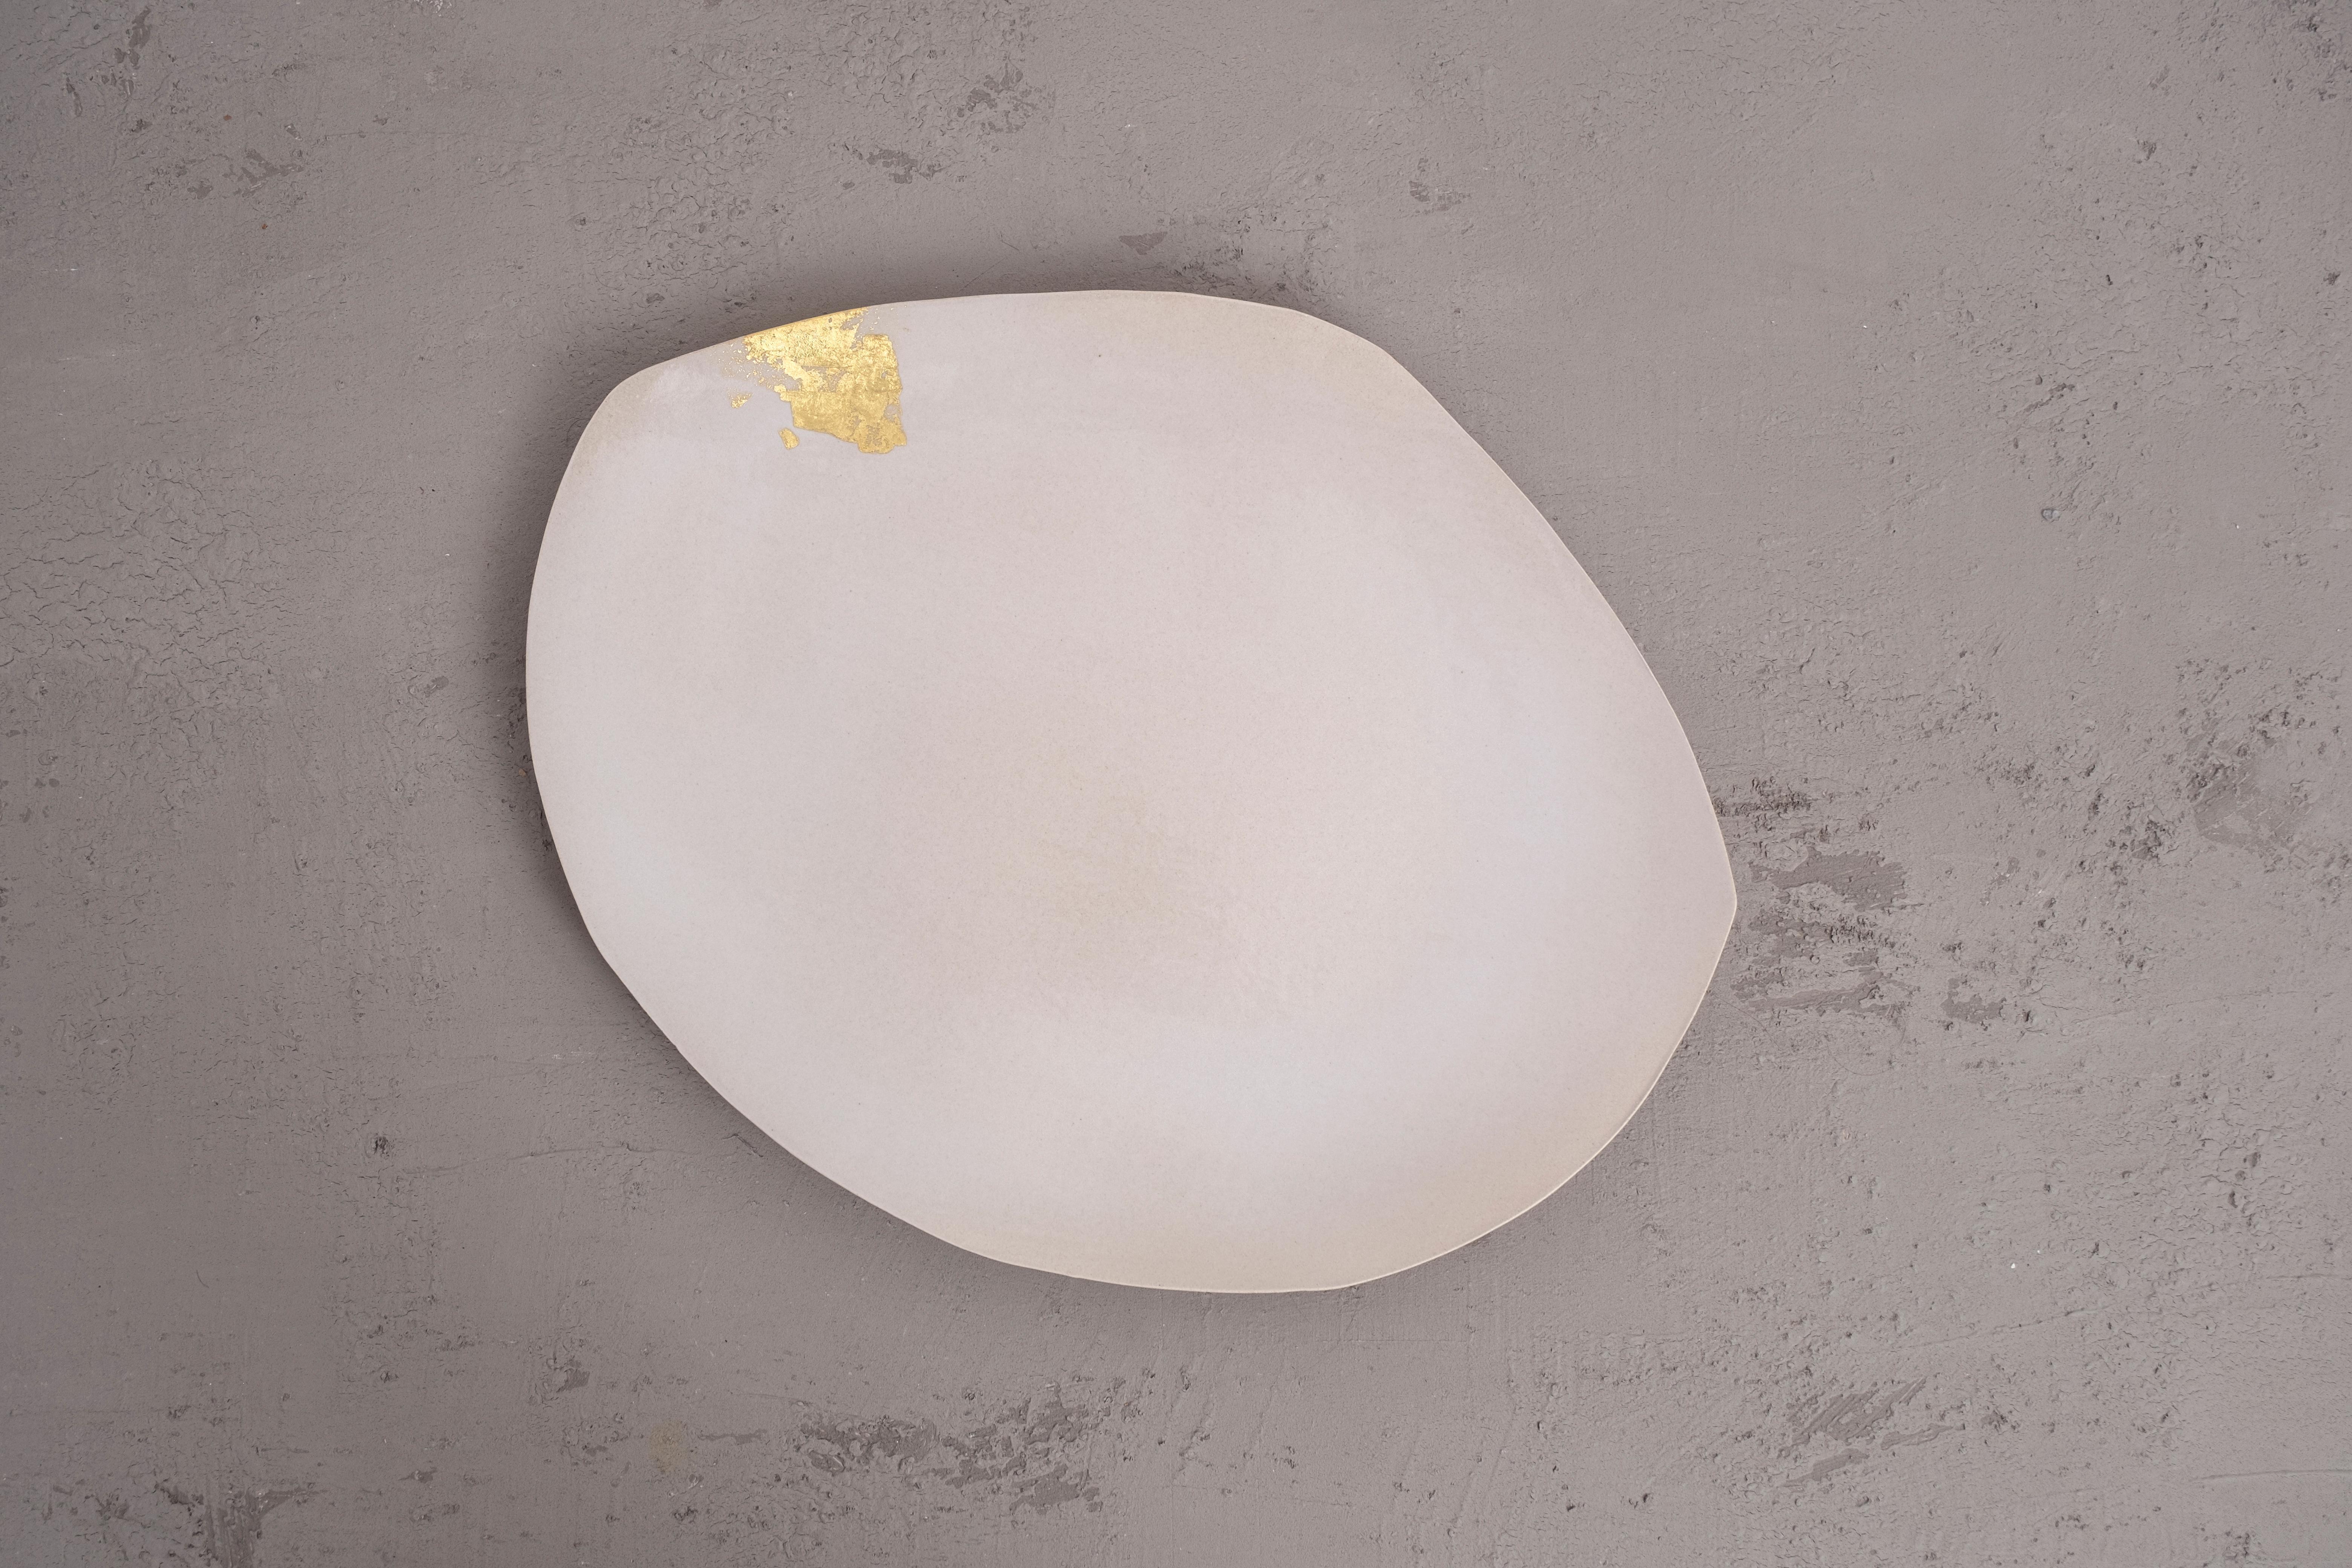 Dune #10 sculpture by Margaux Leycuras
One of a Kind, Signed and numbered
Dimensions: D 40 x H 50 cm.
Material: Sandy stoneware platter with white glaze and 22 Carat gold leaf.

The piece is signed, numbered and delivered with a certificate of